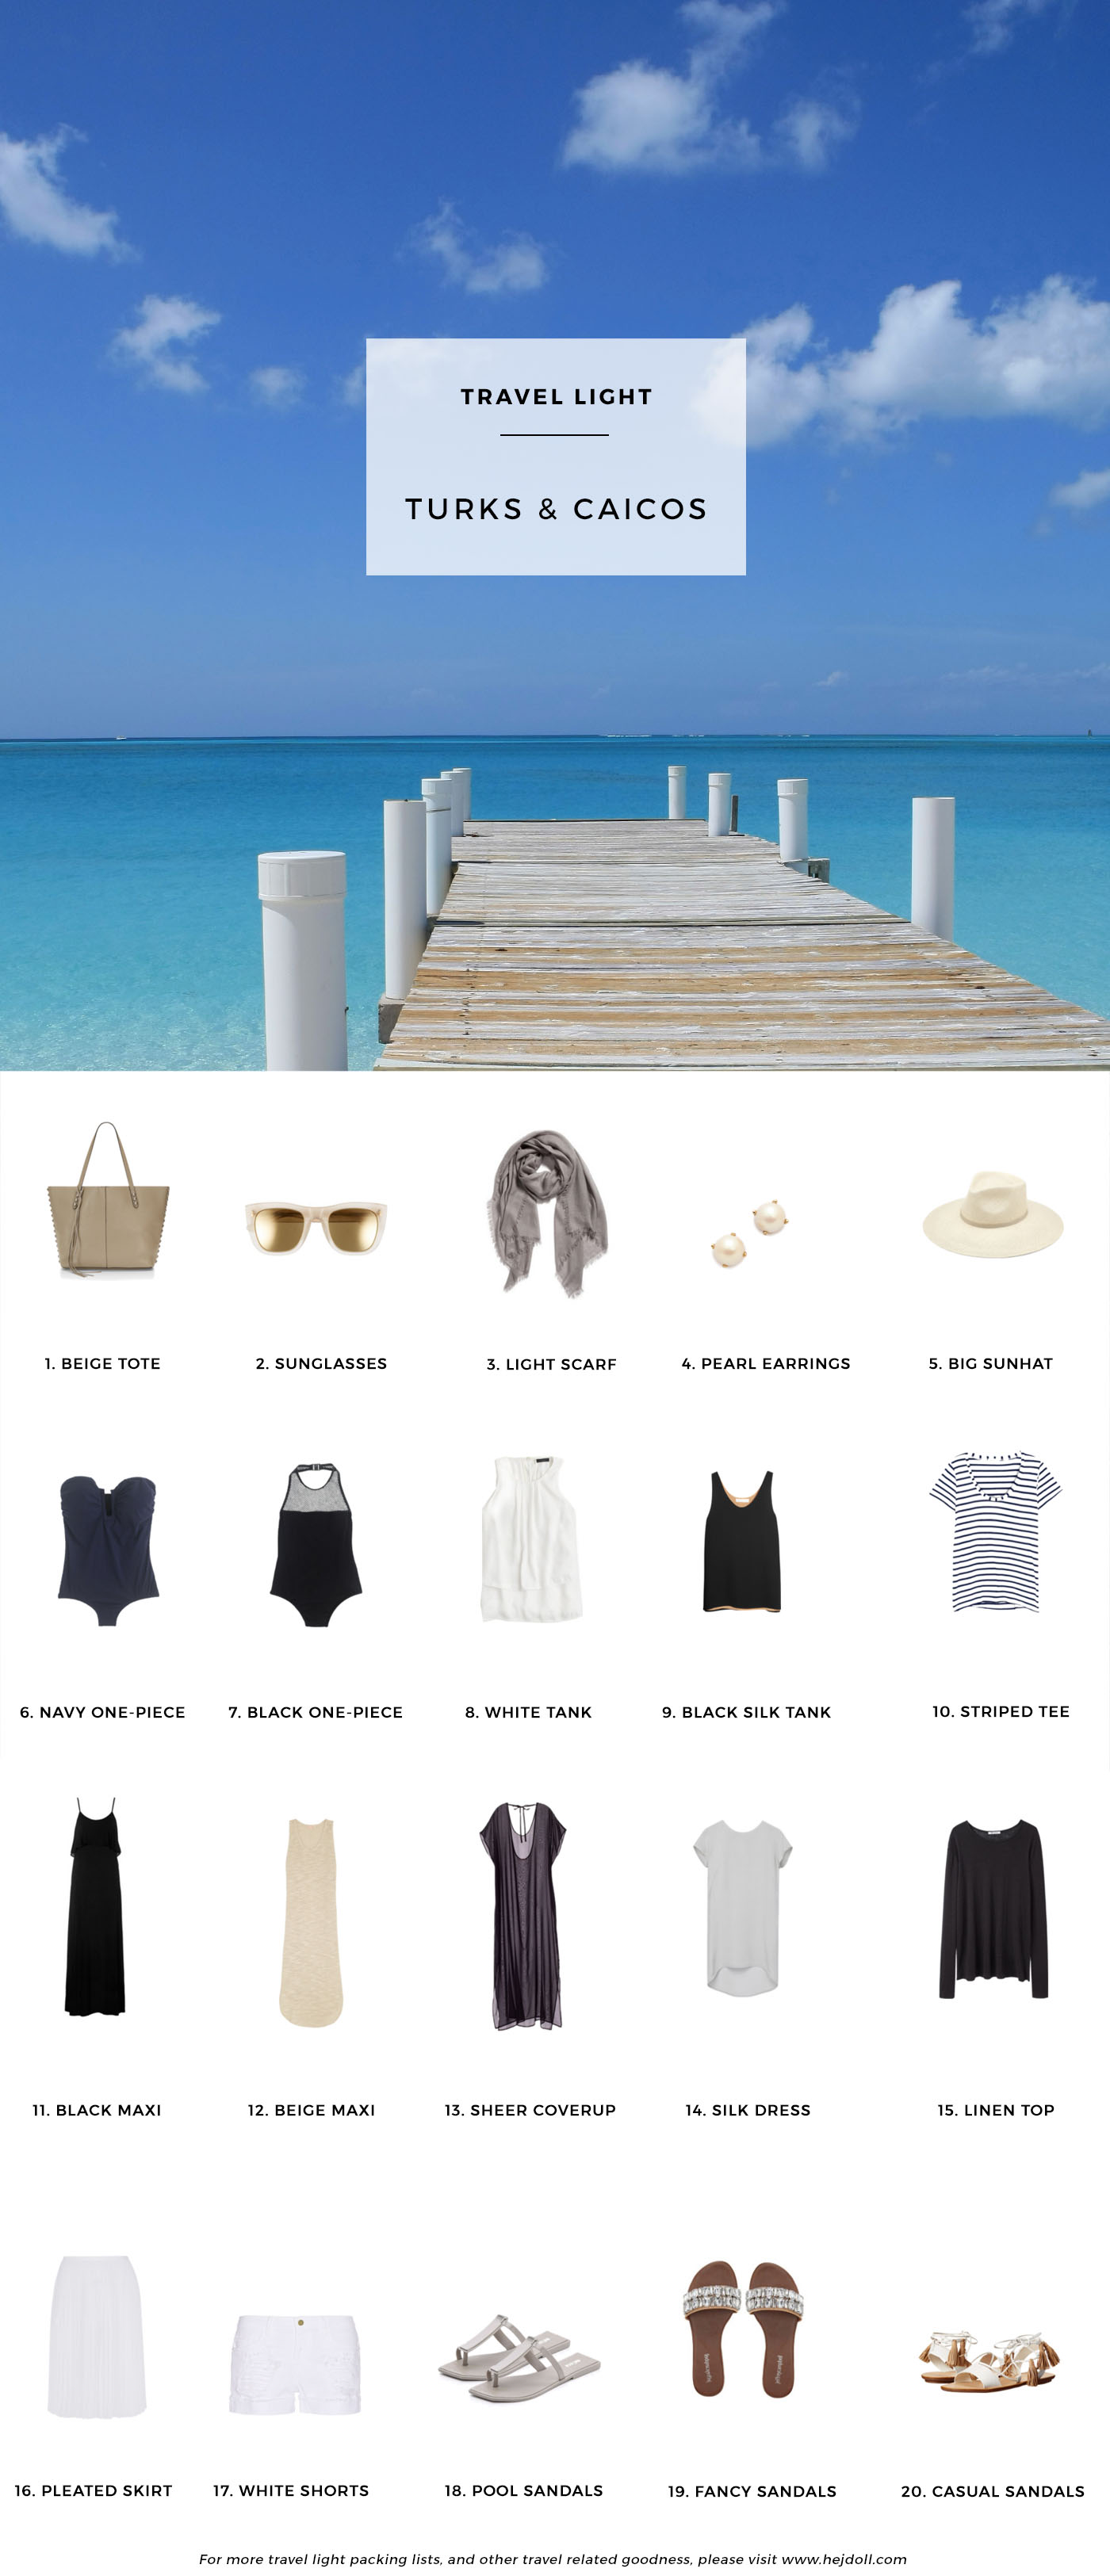 What to pack for Turks and Caicos in the Caribbean. 20 items, 10+ days/outfits, 1 carry on suitcase. #travellight #packingtips #traveltips